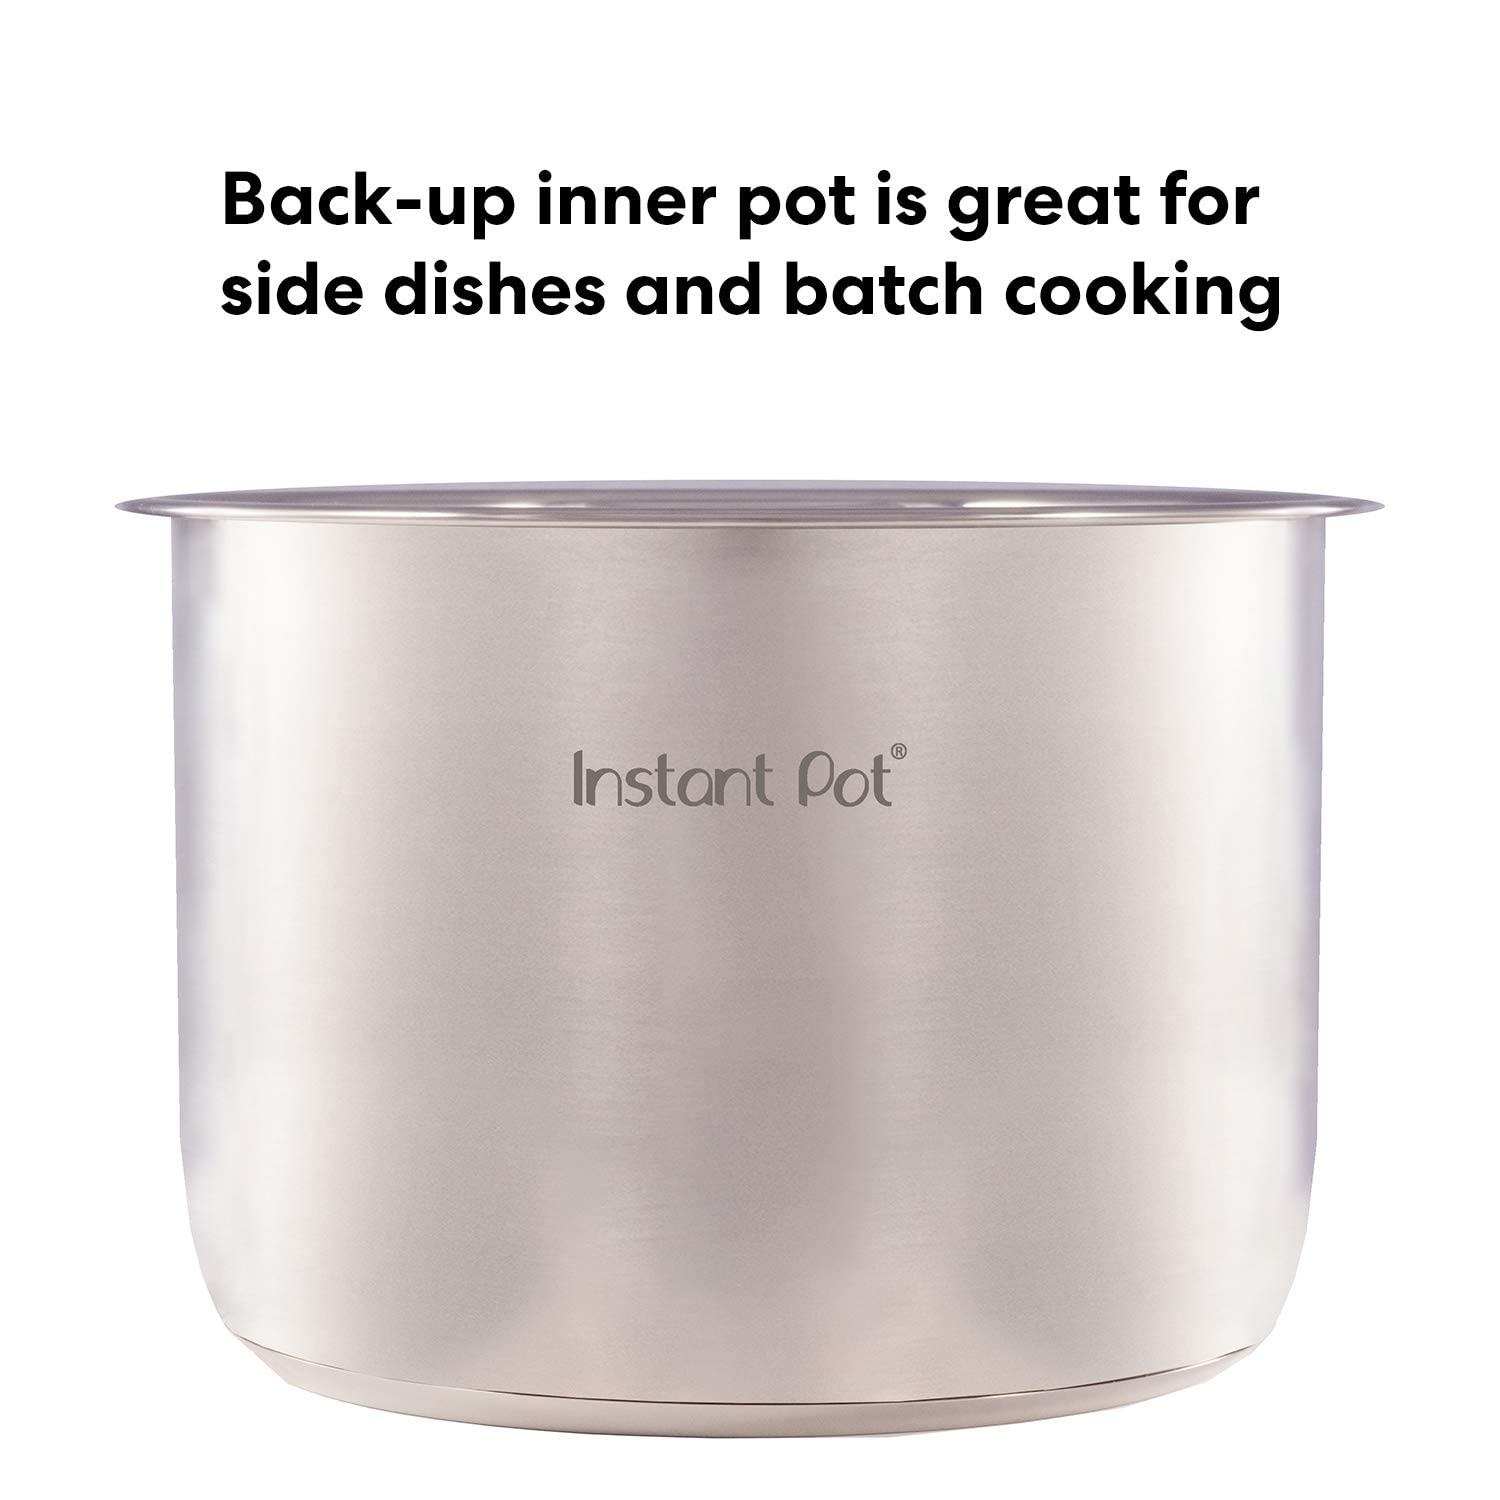 Instant Pot Stainless Steel Inner Cooking Pot 6-Qt, Polished Surface, Rice Cooker, Stainless Steel Cooking Pot